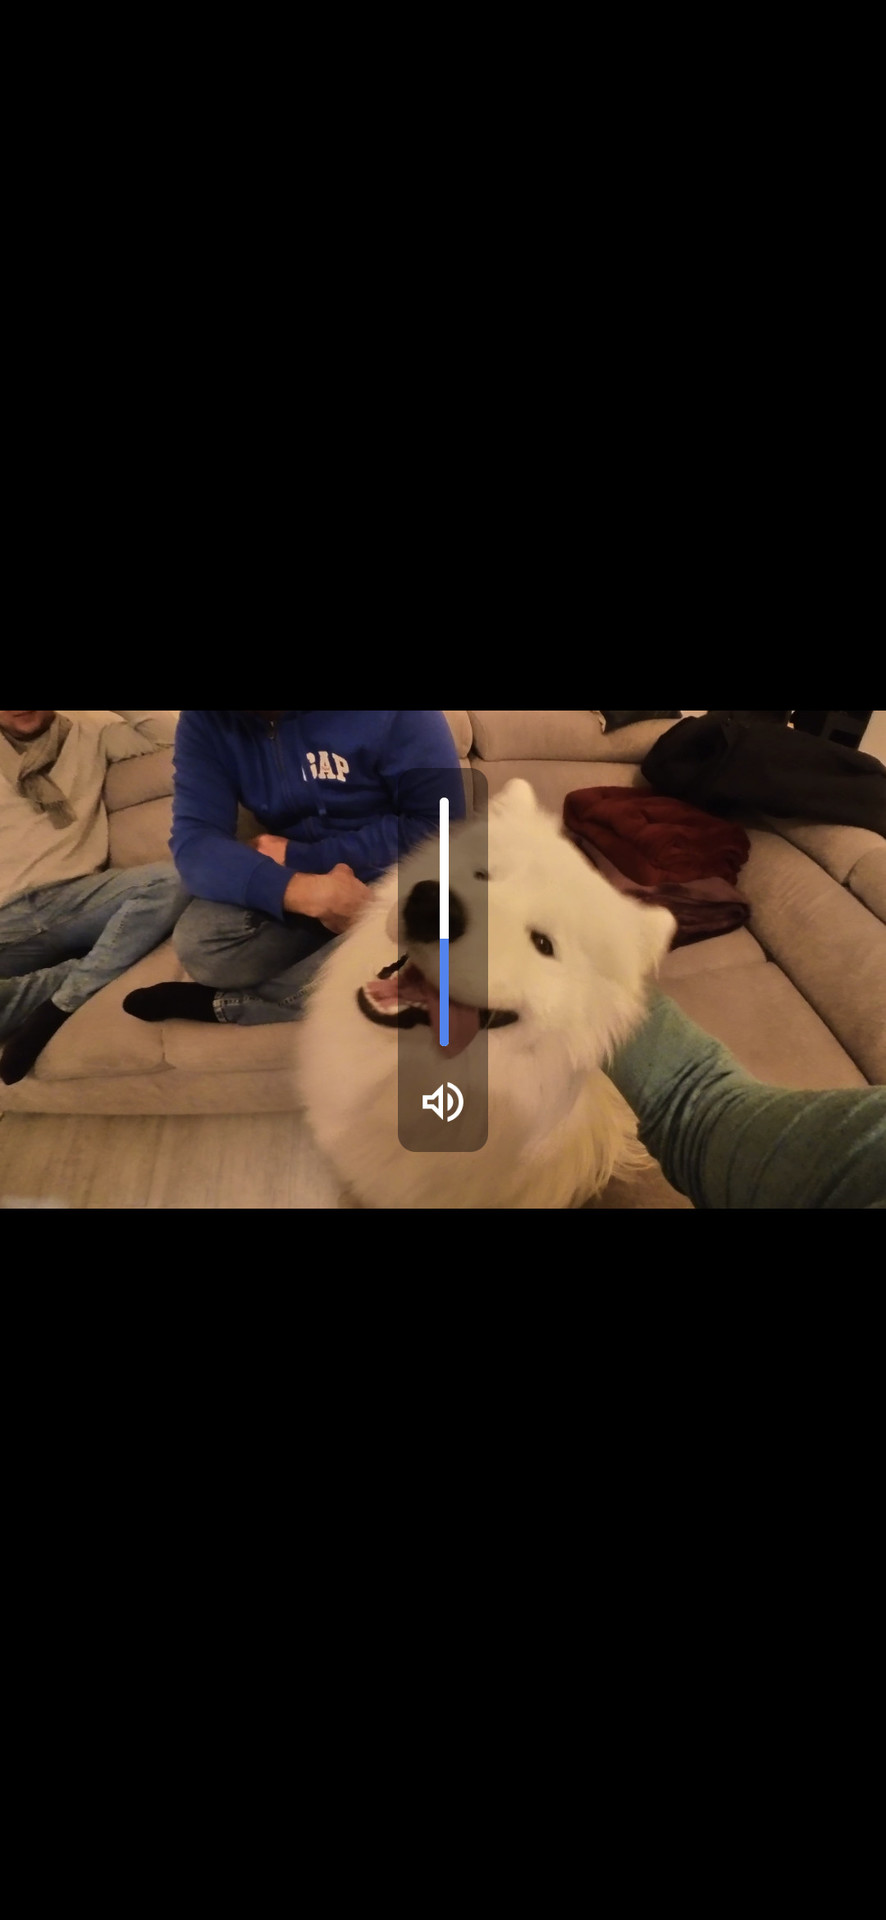 Google Files showing a dog video with the volume gesture overlay.